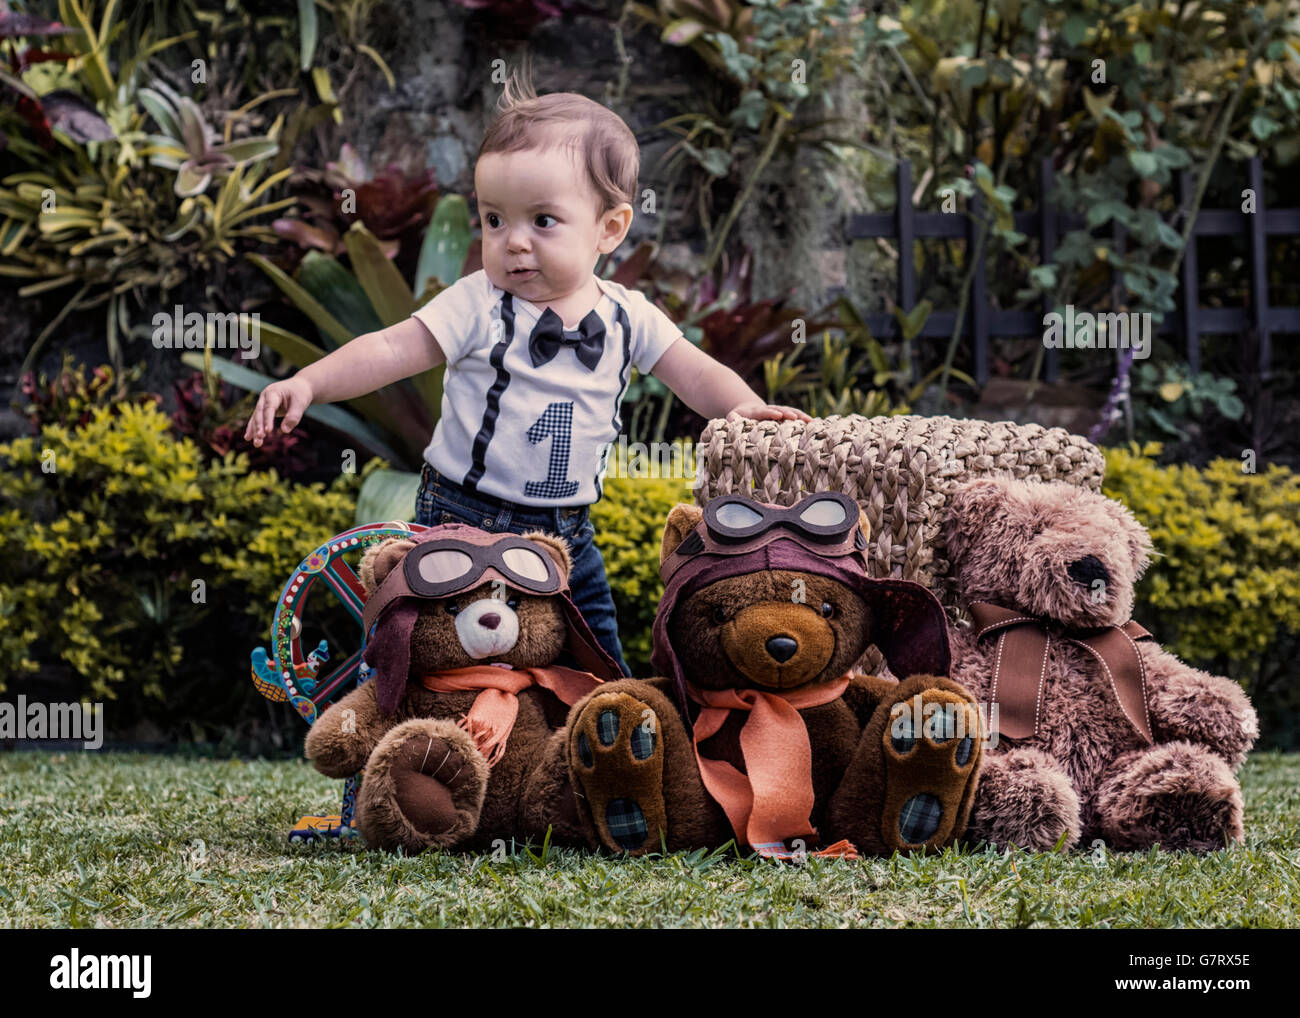 Baby boy playing with teddy bears at the garden, learning to walk Stock Photo